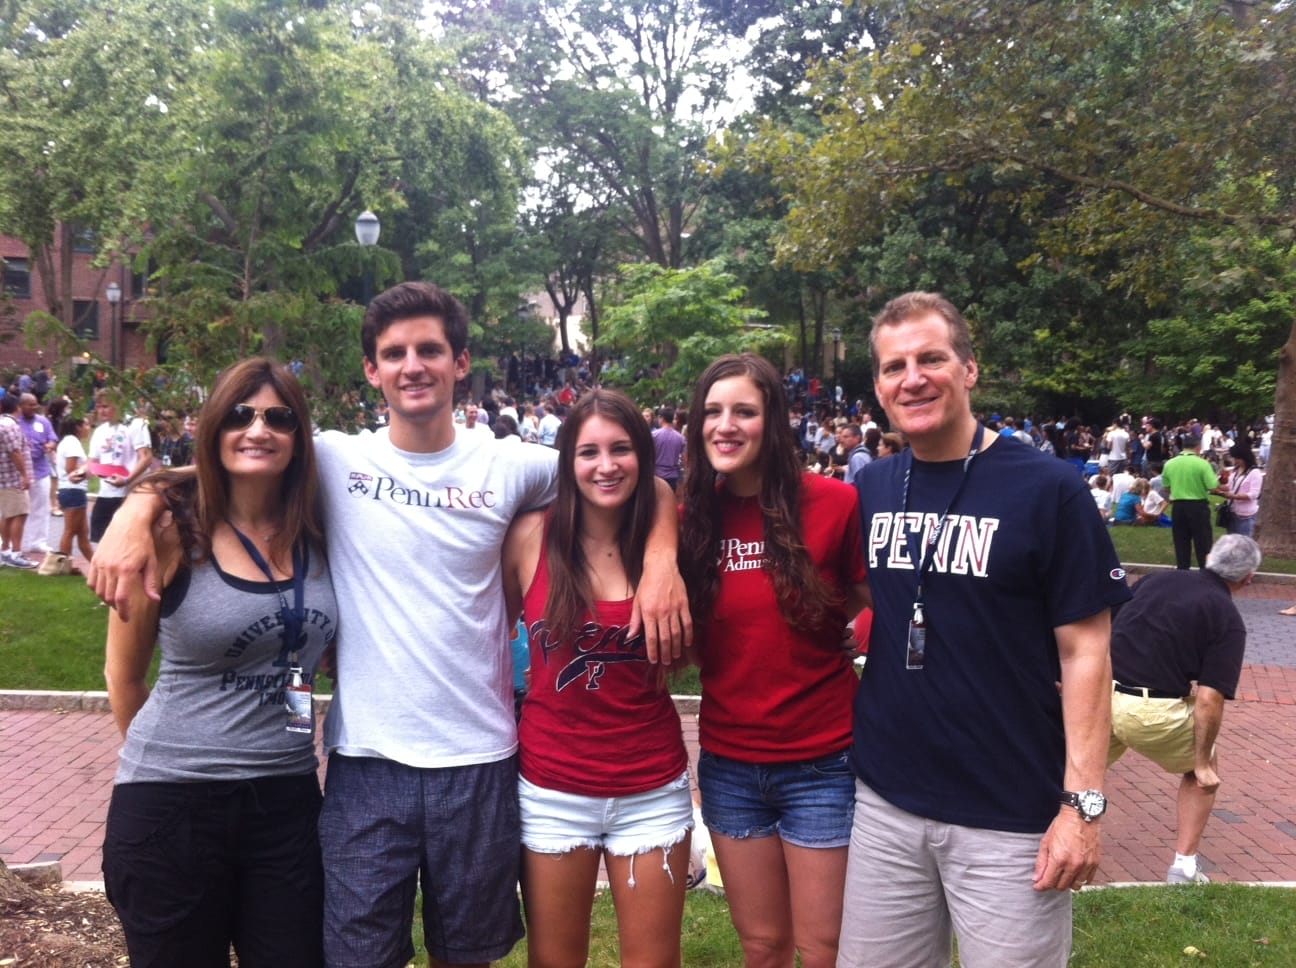 The Biggest Penn Family on Campus?